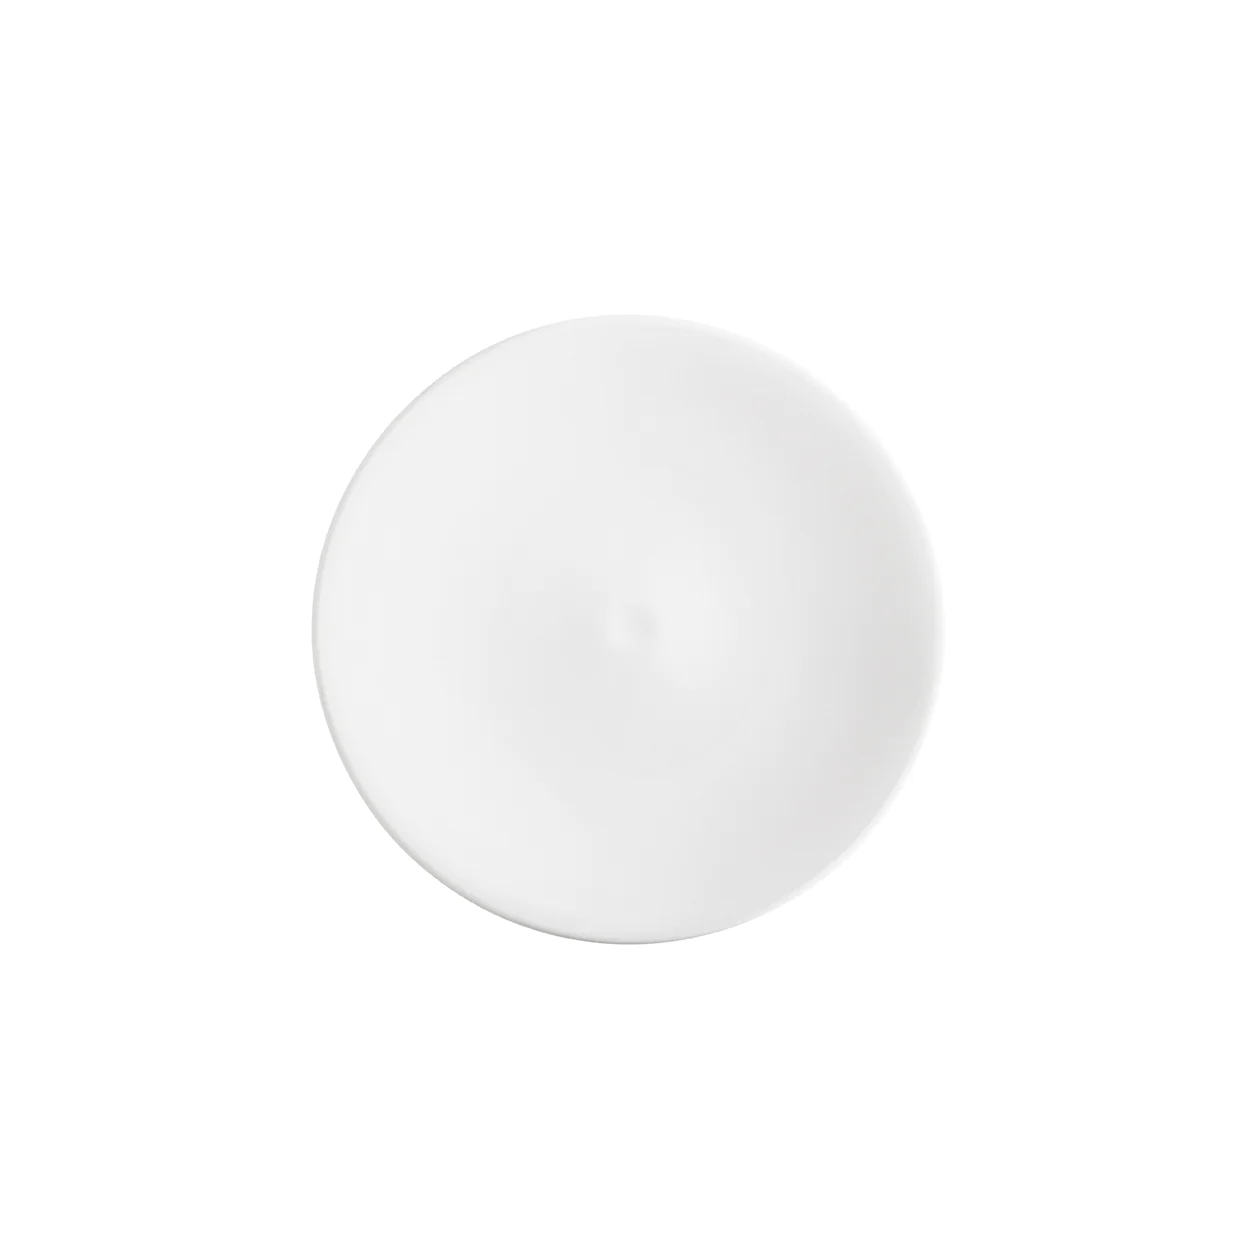 Degrenne Cocotte round lid plate 18 cm white